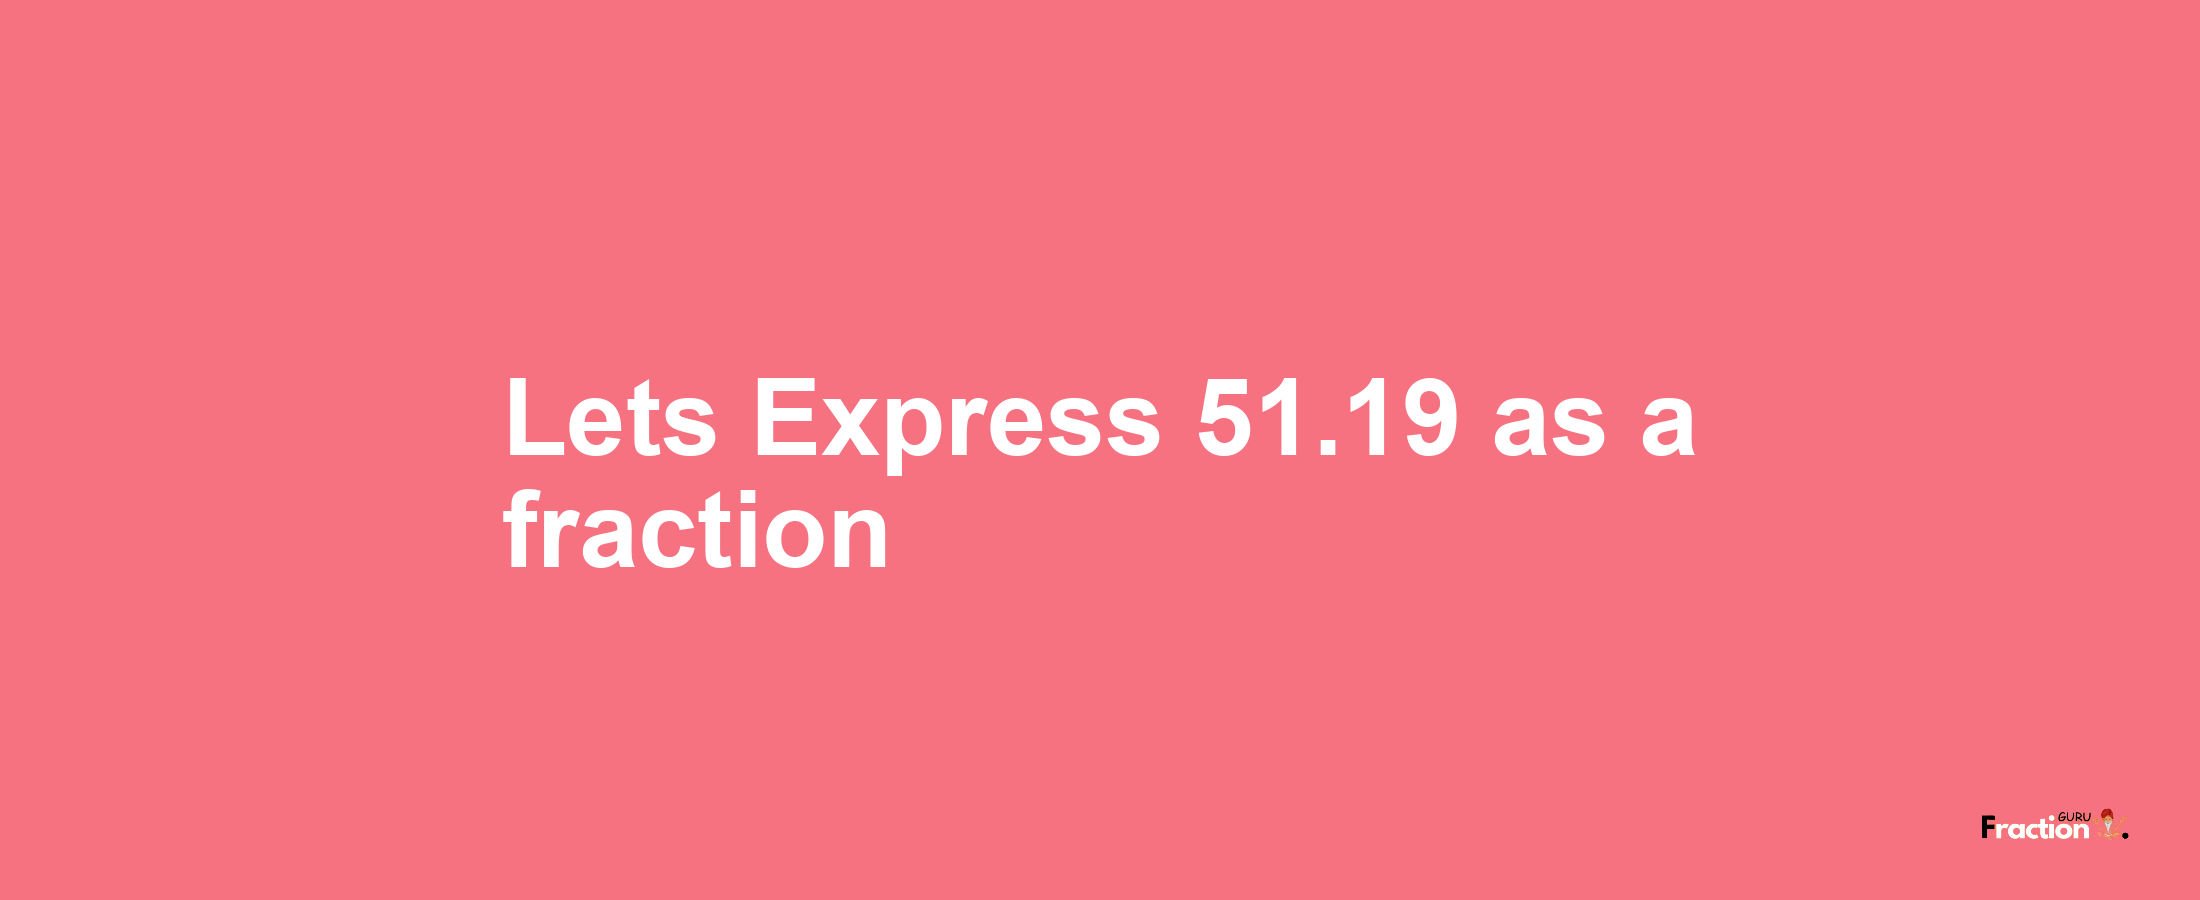 Lets Express 51.19 as afraction